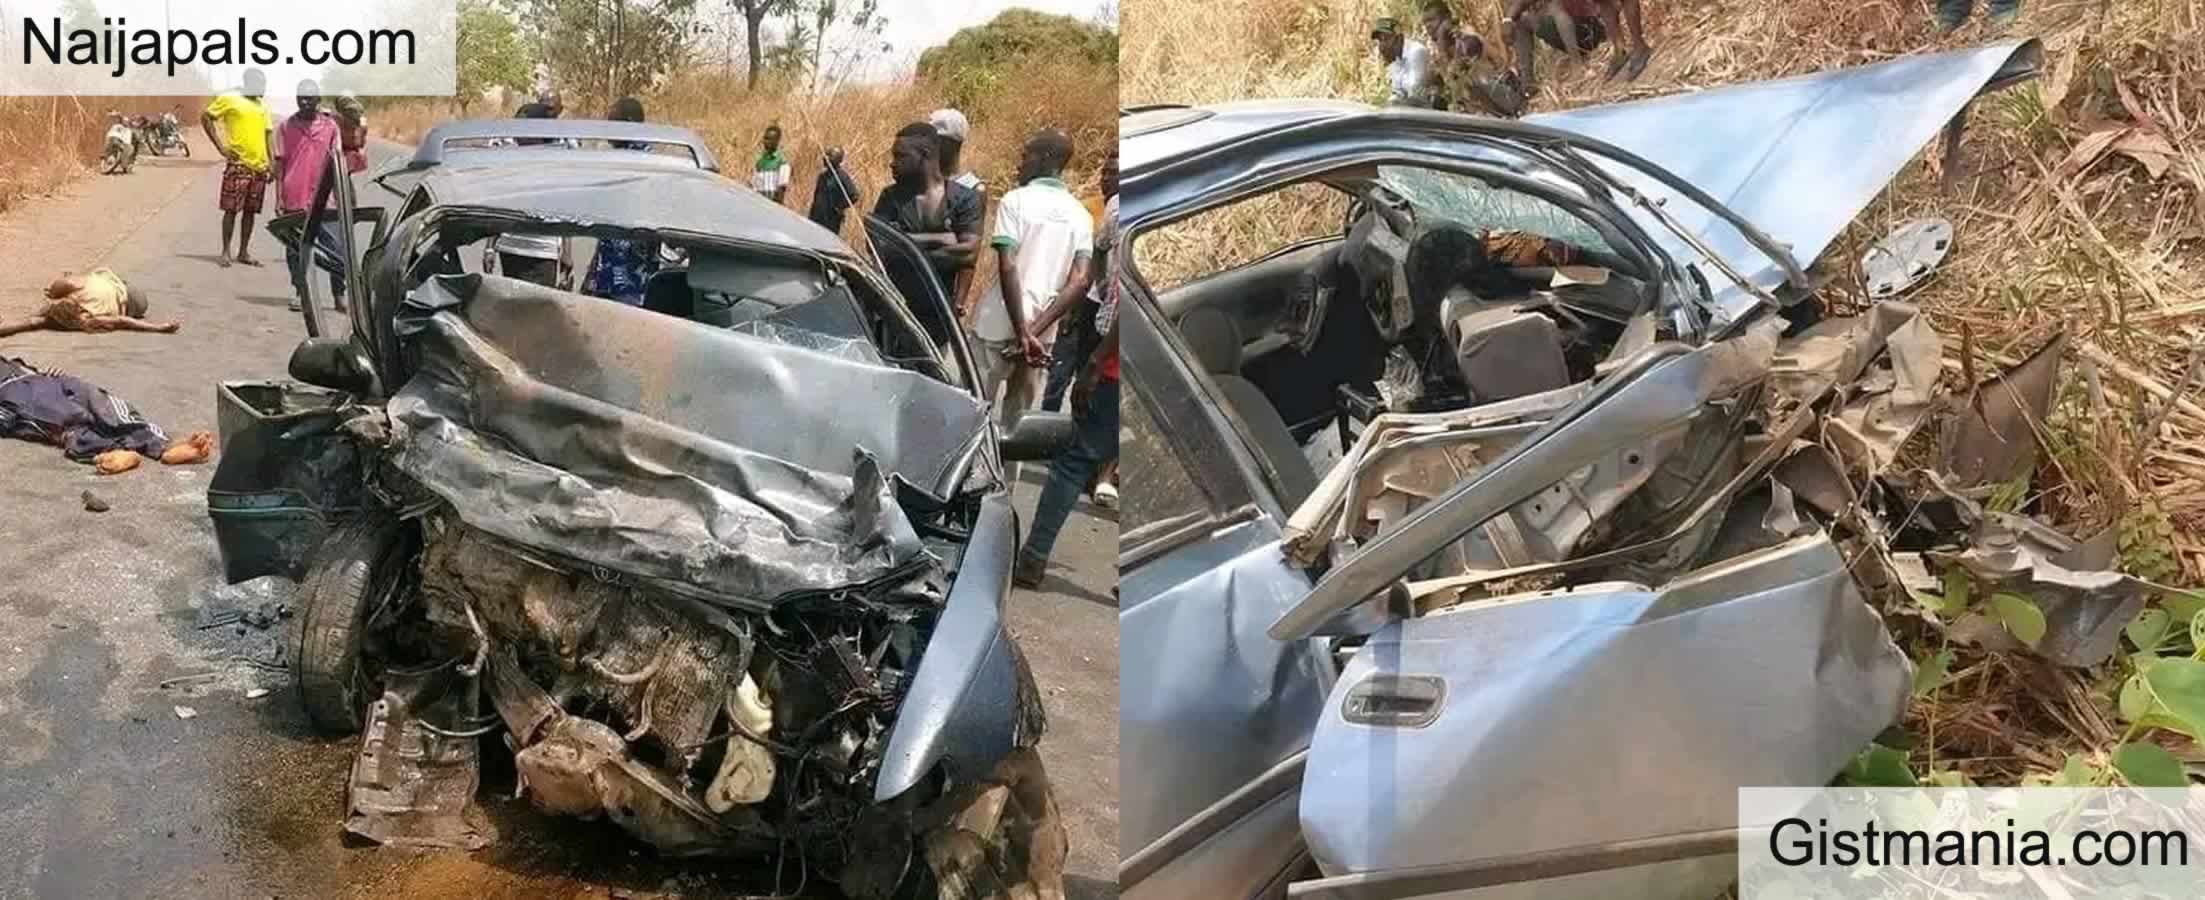 Two Siblings, Motorcyclist Allegedly Crushes To Death By Speeding Student Driver In Ondo